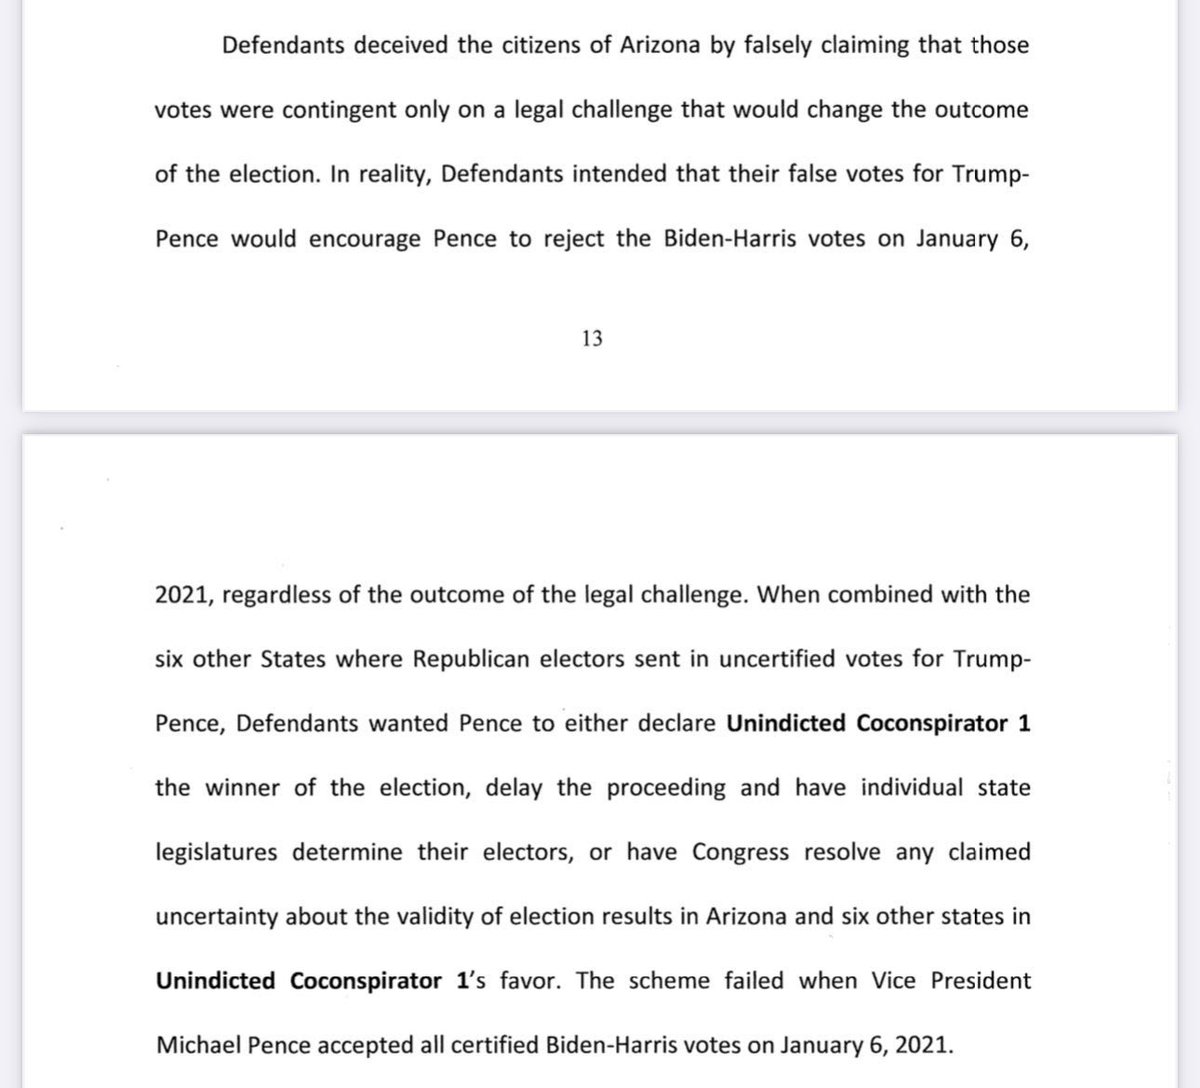 These texts were among documents Chesebro handed over to state prosecutors, not only in Michigan, but also Arizona, as part of his cooperation in ongoing criminal probes. In Arizona, Chesebro clearly among unindicted co-conspirators & this part of indictment notable in context: